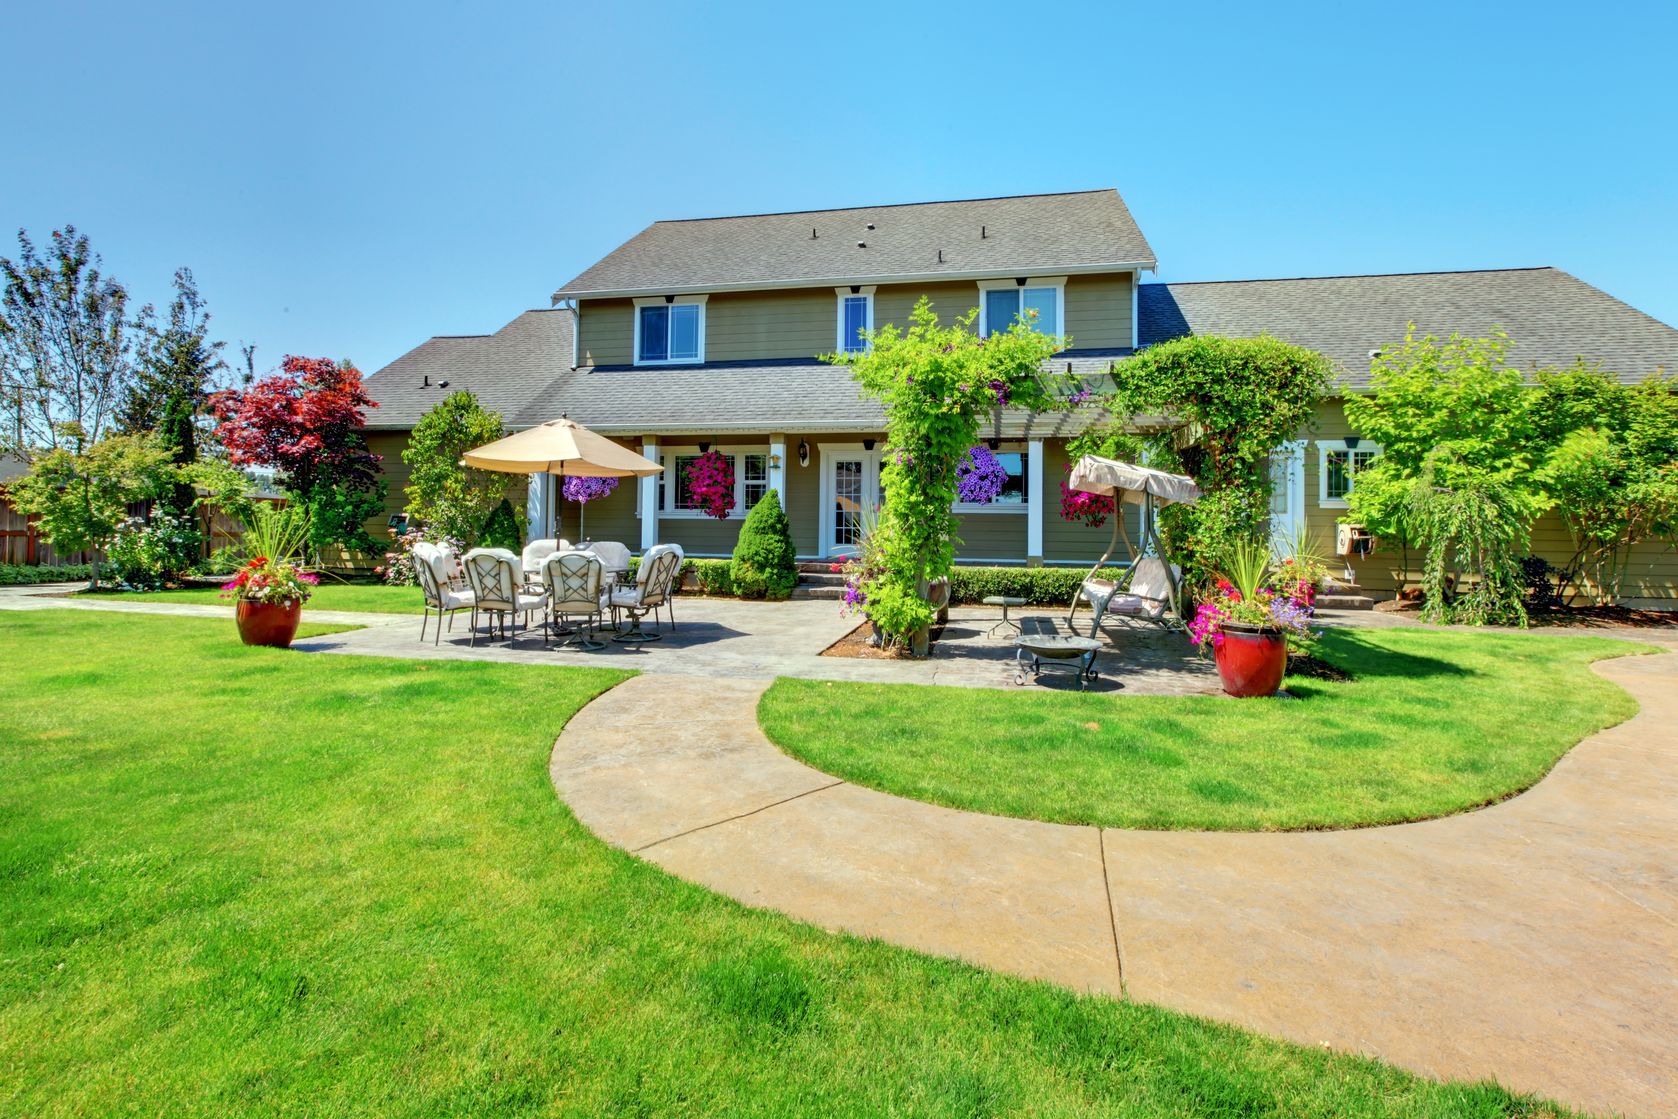 Patterson, Modesto, Stanislaus County, CA Landscaping Insurance